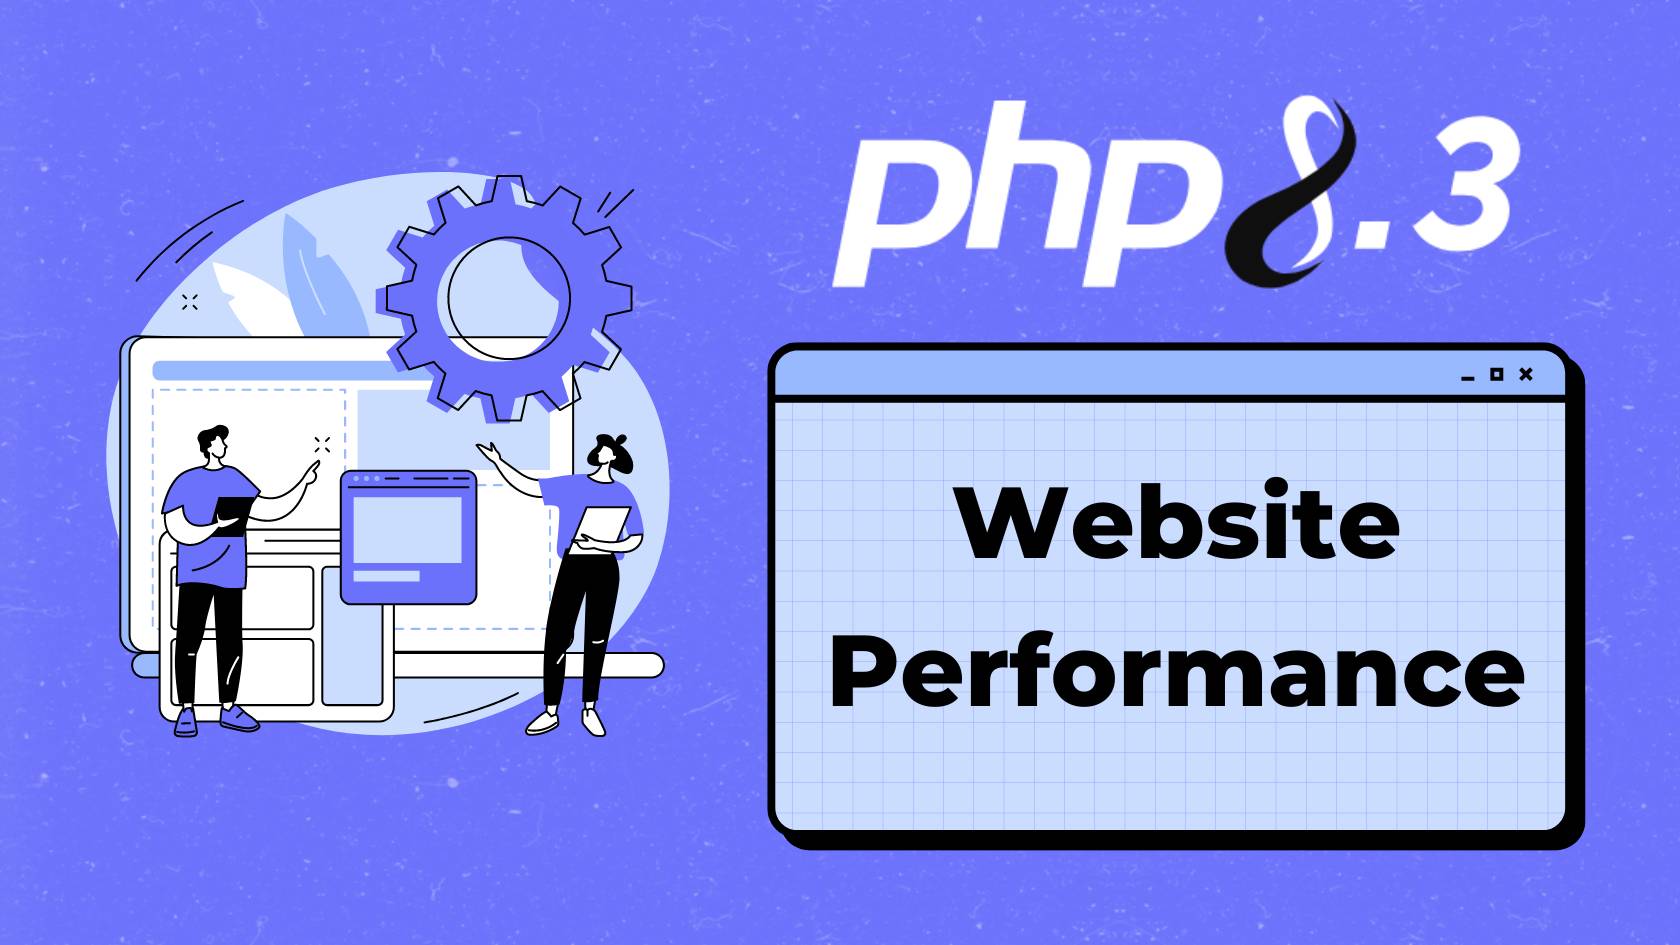 Introduction to PHP 8.3 and its Performance Enhancements